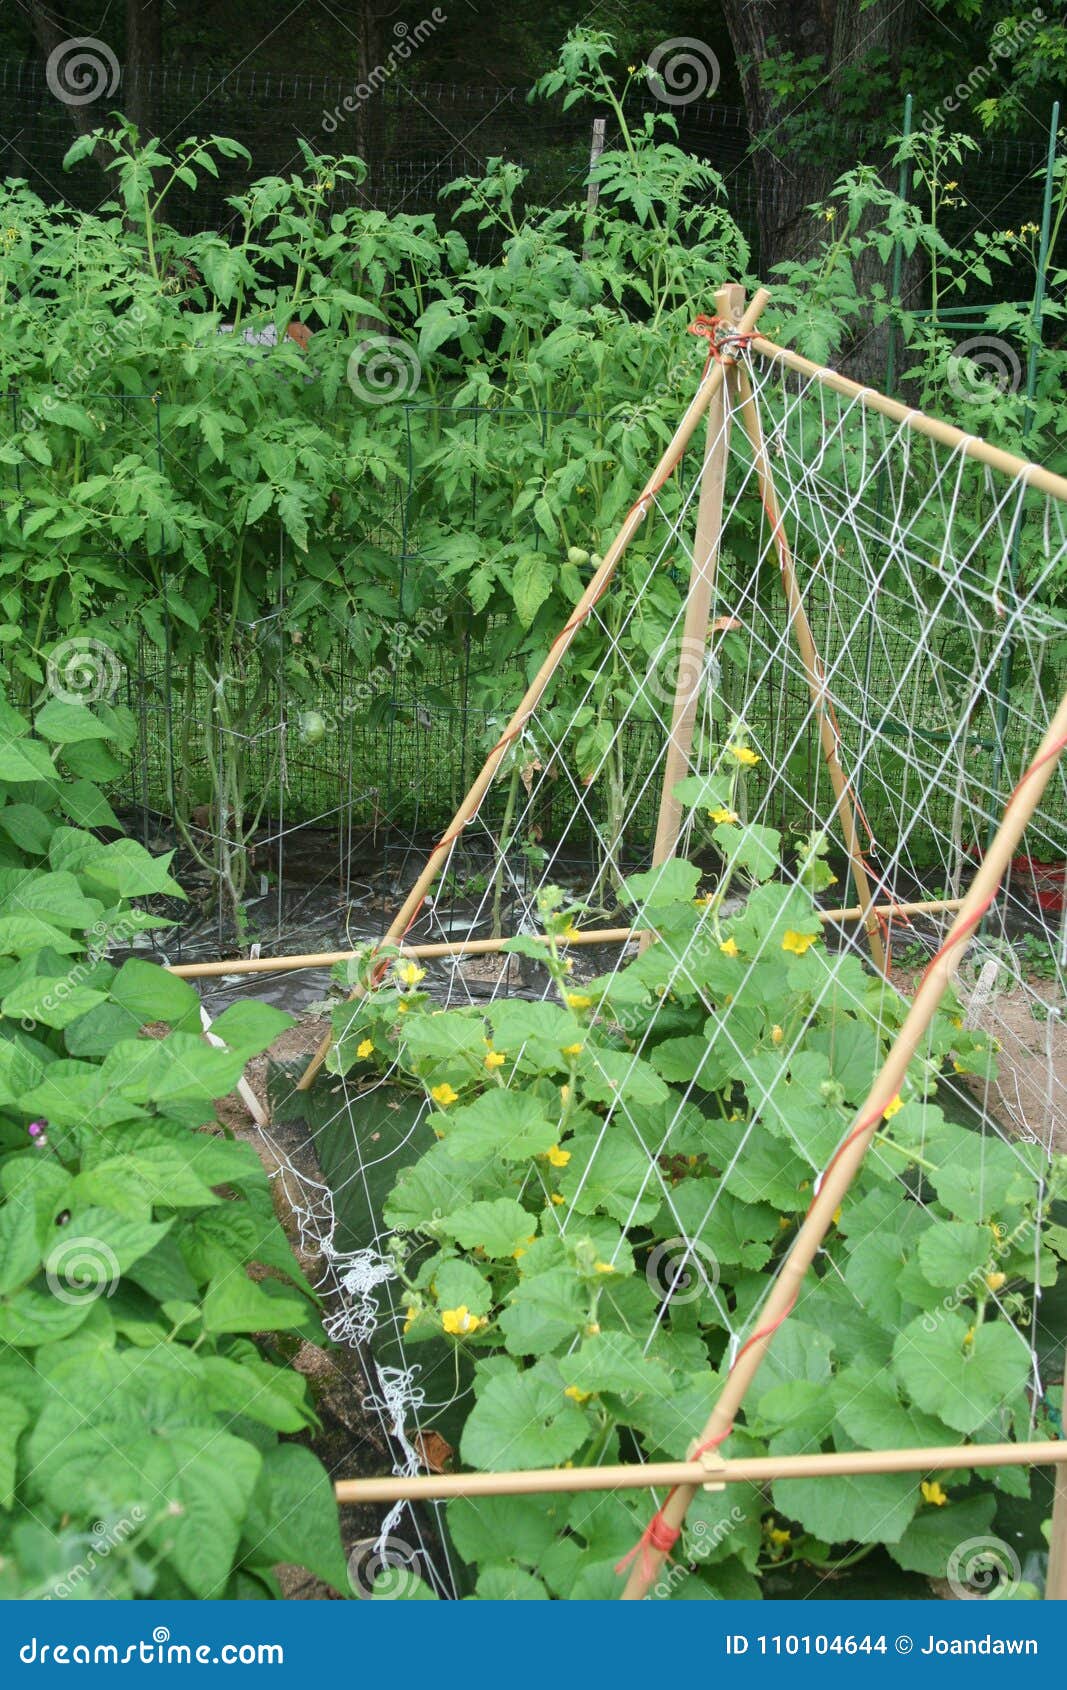 Signs Of Growth In Early Summer Vegetable Garden Stock Photo